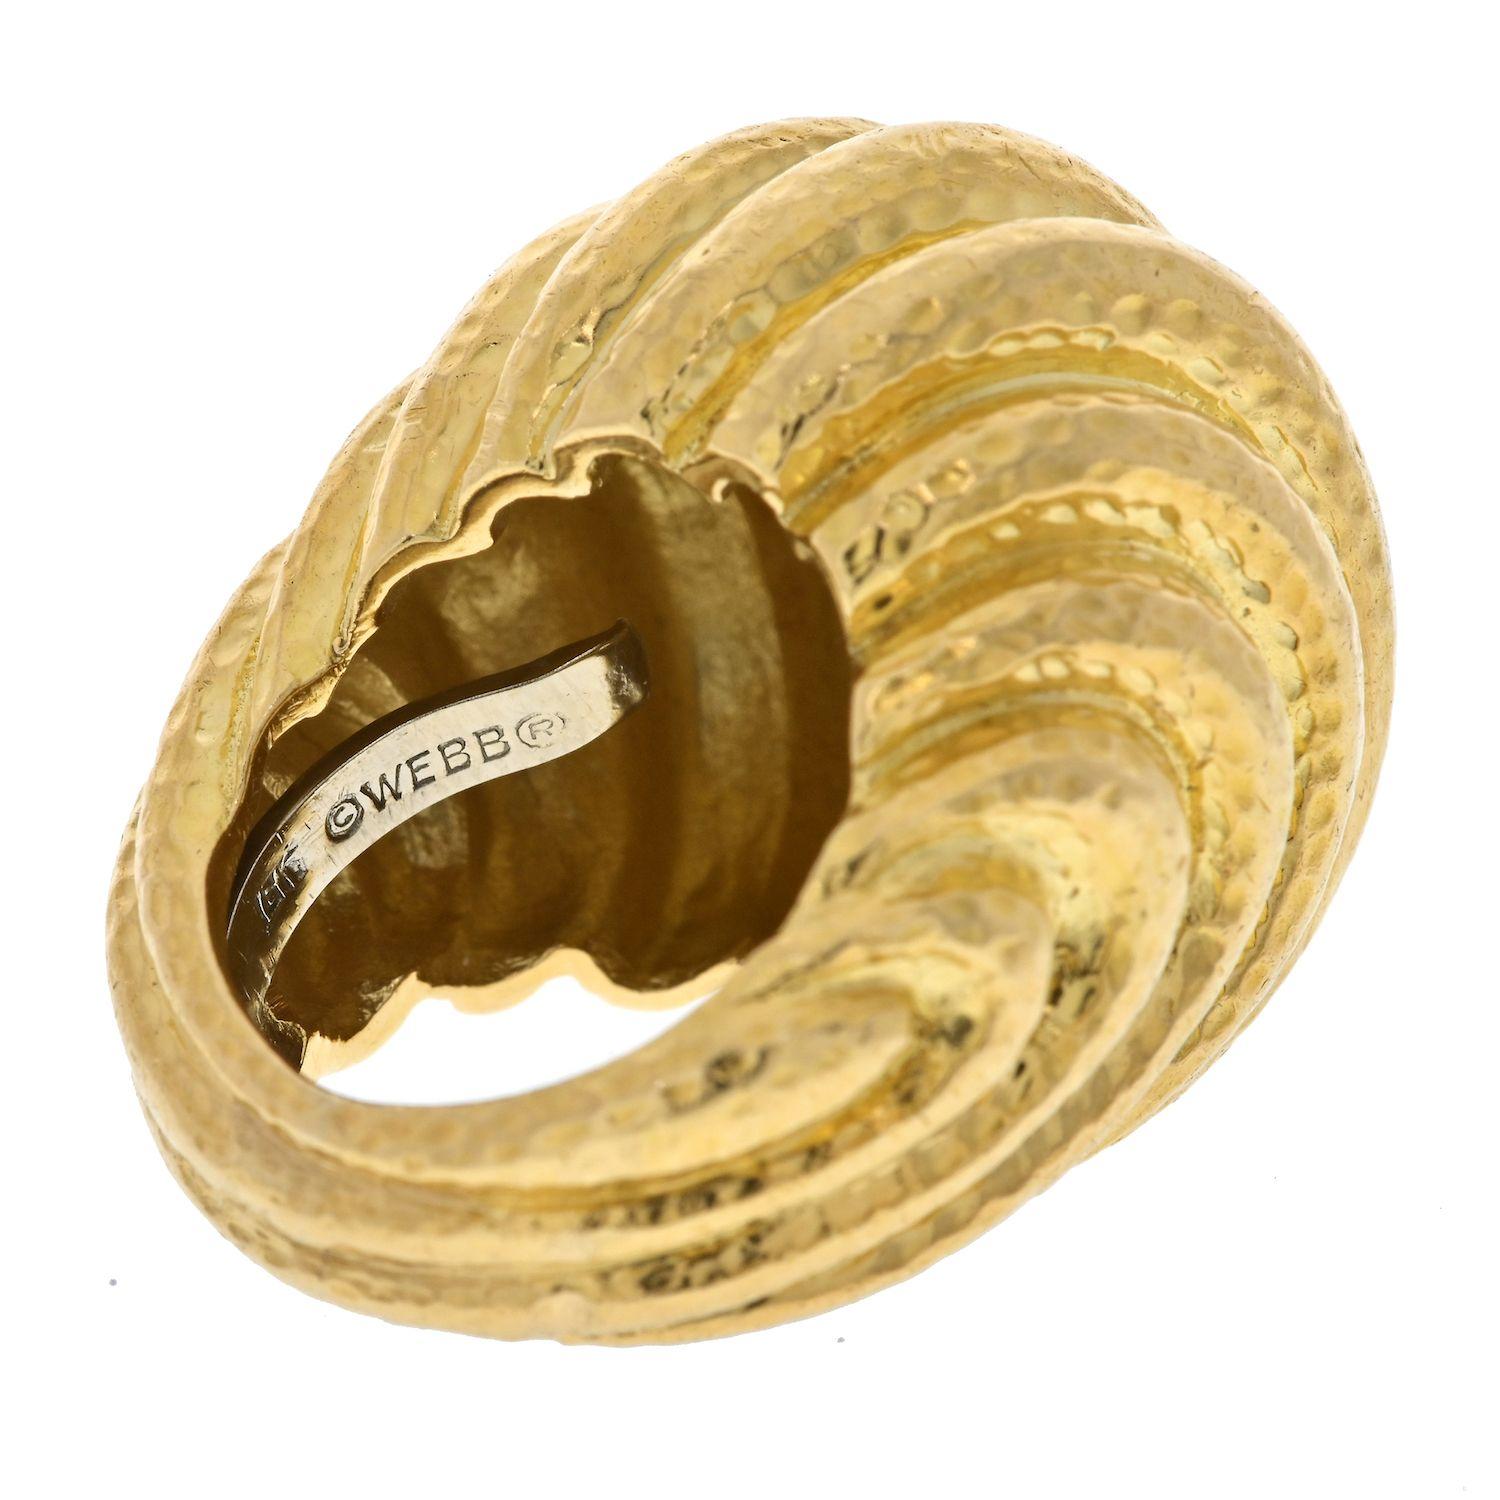 David Webb 18K Yellow Gold Hammered Domed Fluted Style Ring.
Fluted dome cocktail ring in hammered 18k yellow gold, signed 